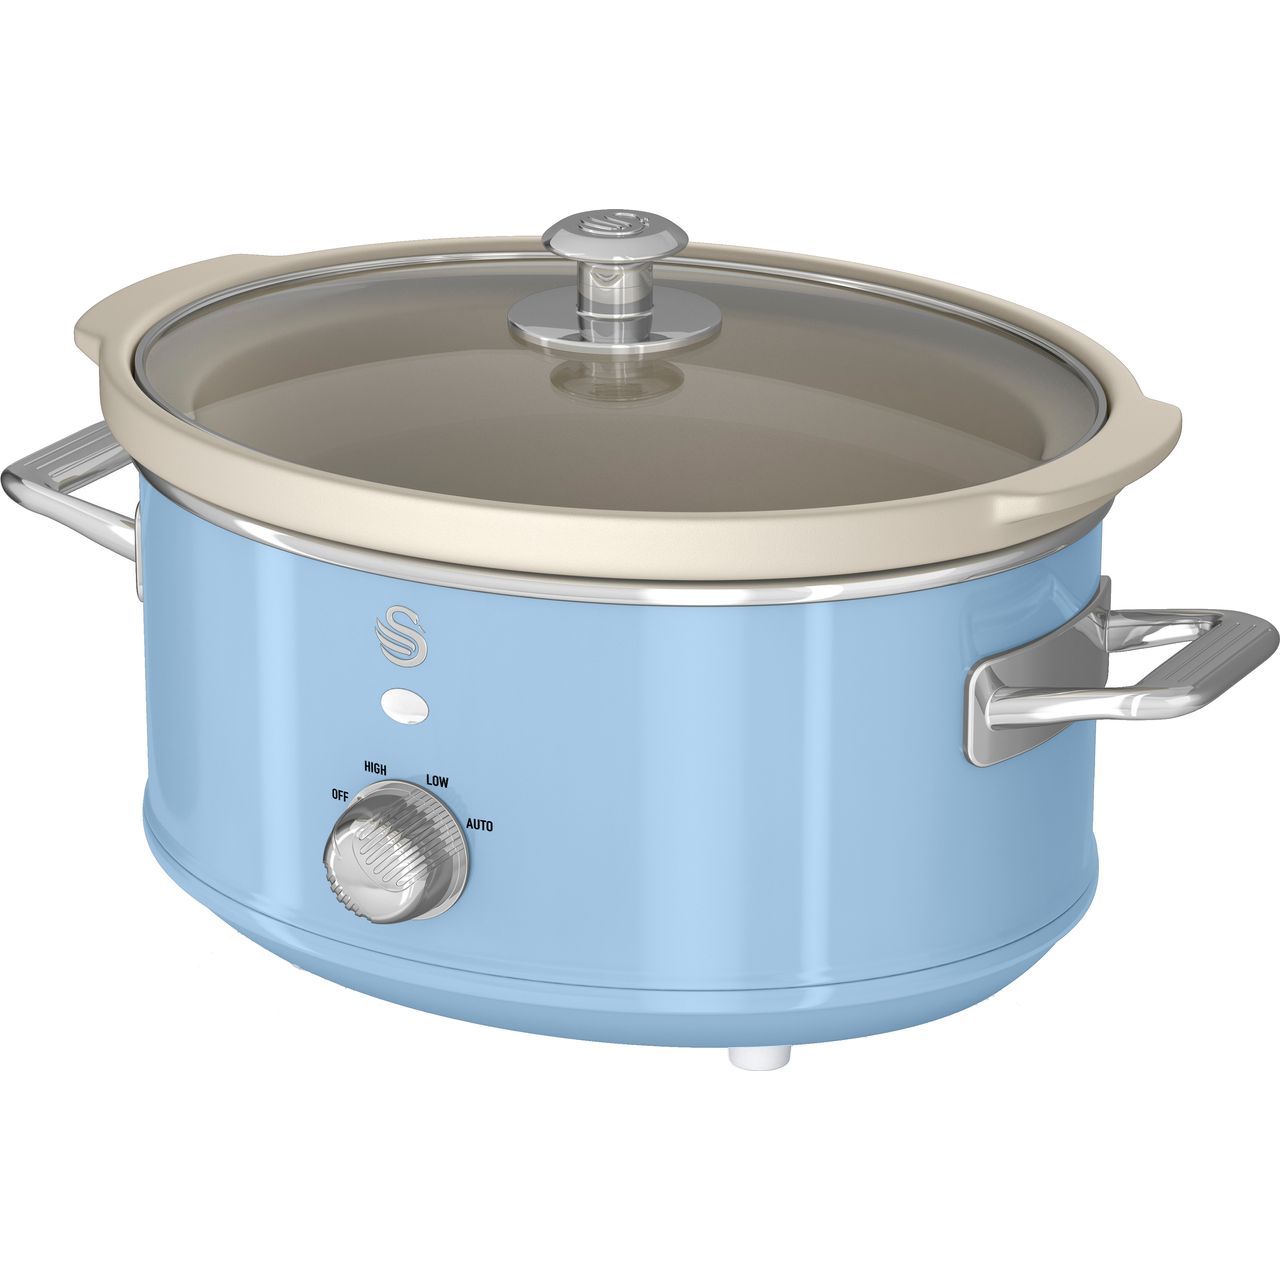 Swan Retro SF17021BLN 3.5 Litre Slow Cooker Review